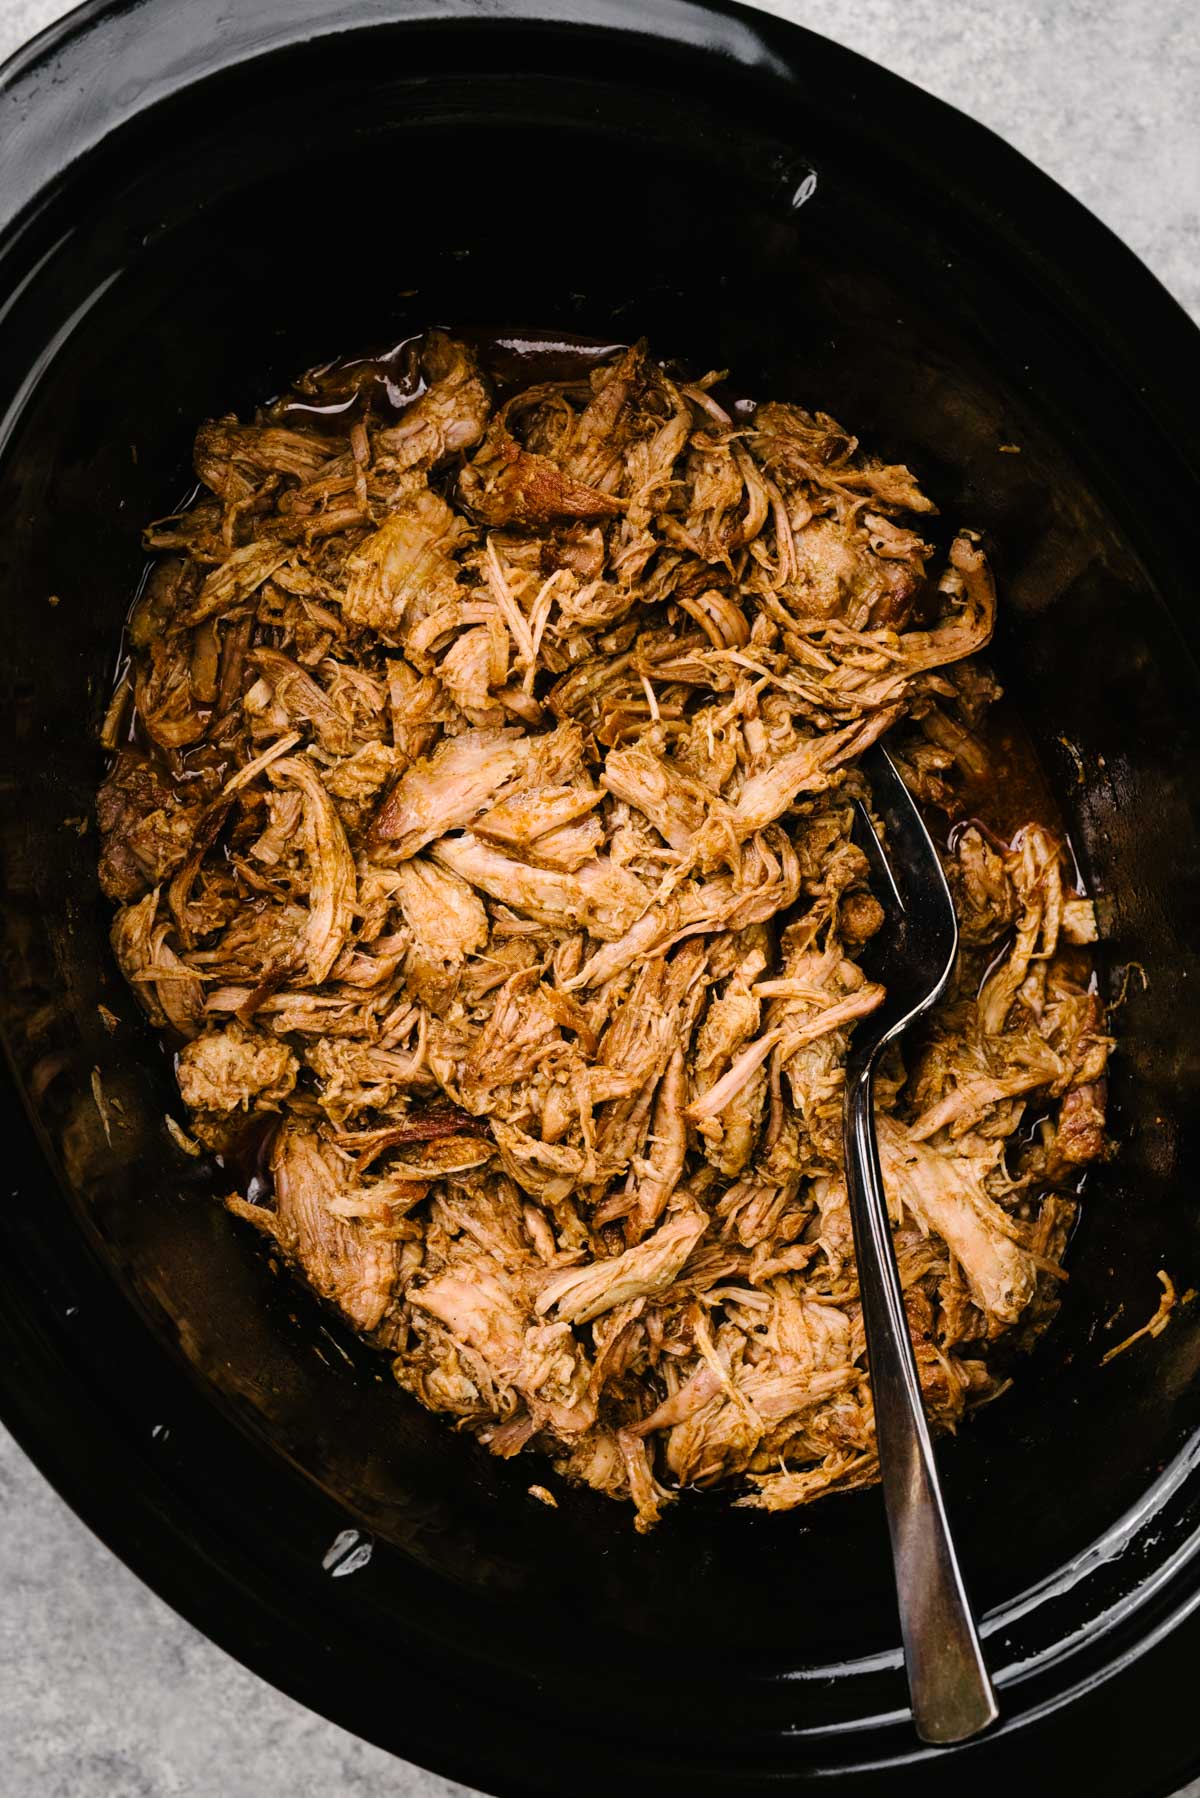 Shredded pulled pork in a crockpot tossed with pan juices.